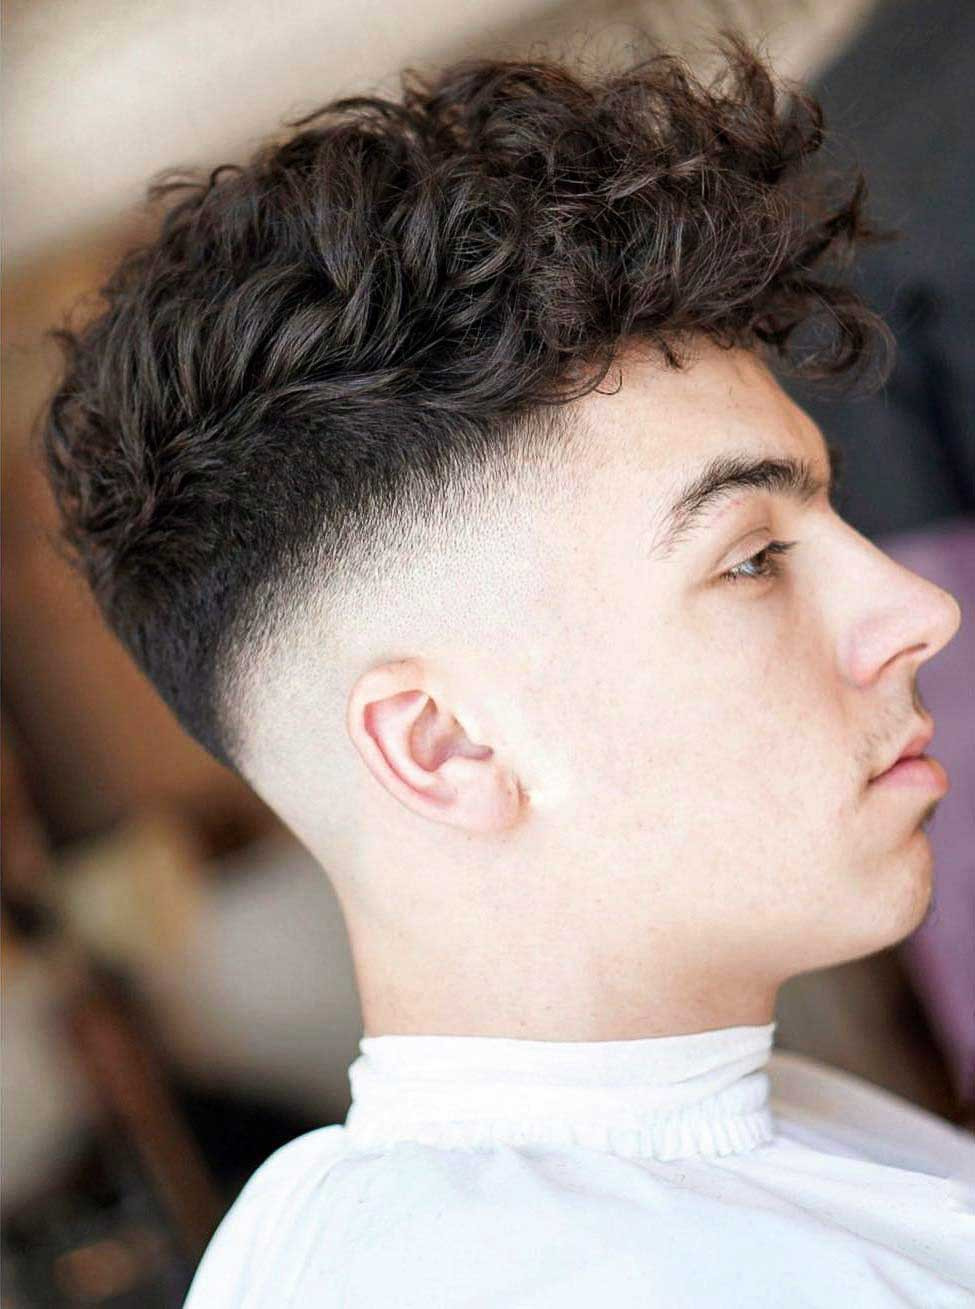 Hairstyle For Curly Hair Boys
 The 45 Best Curly Hairstyles for Men